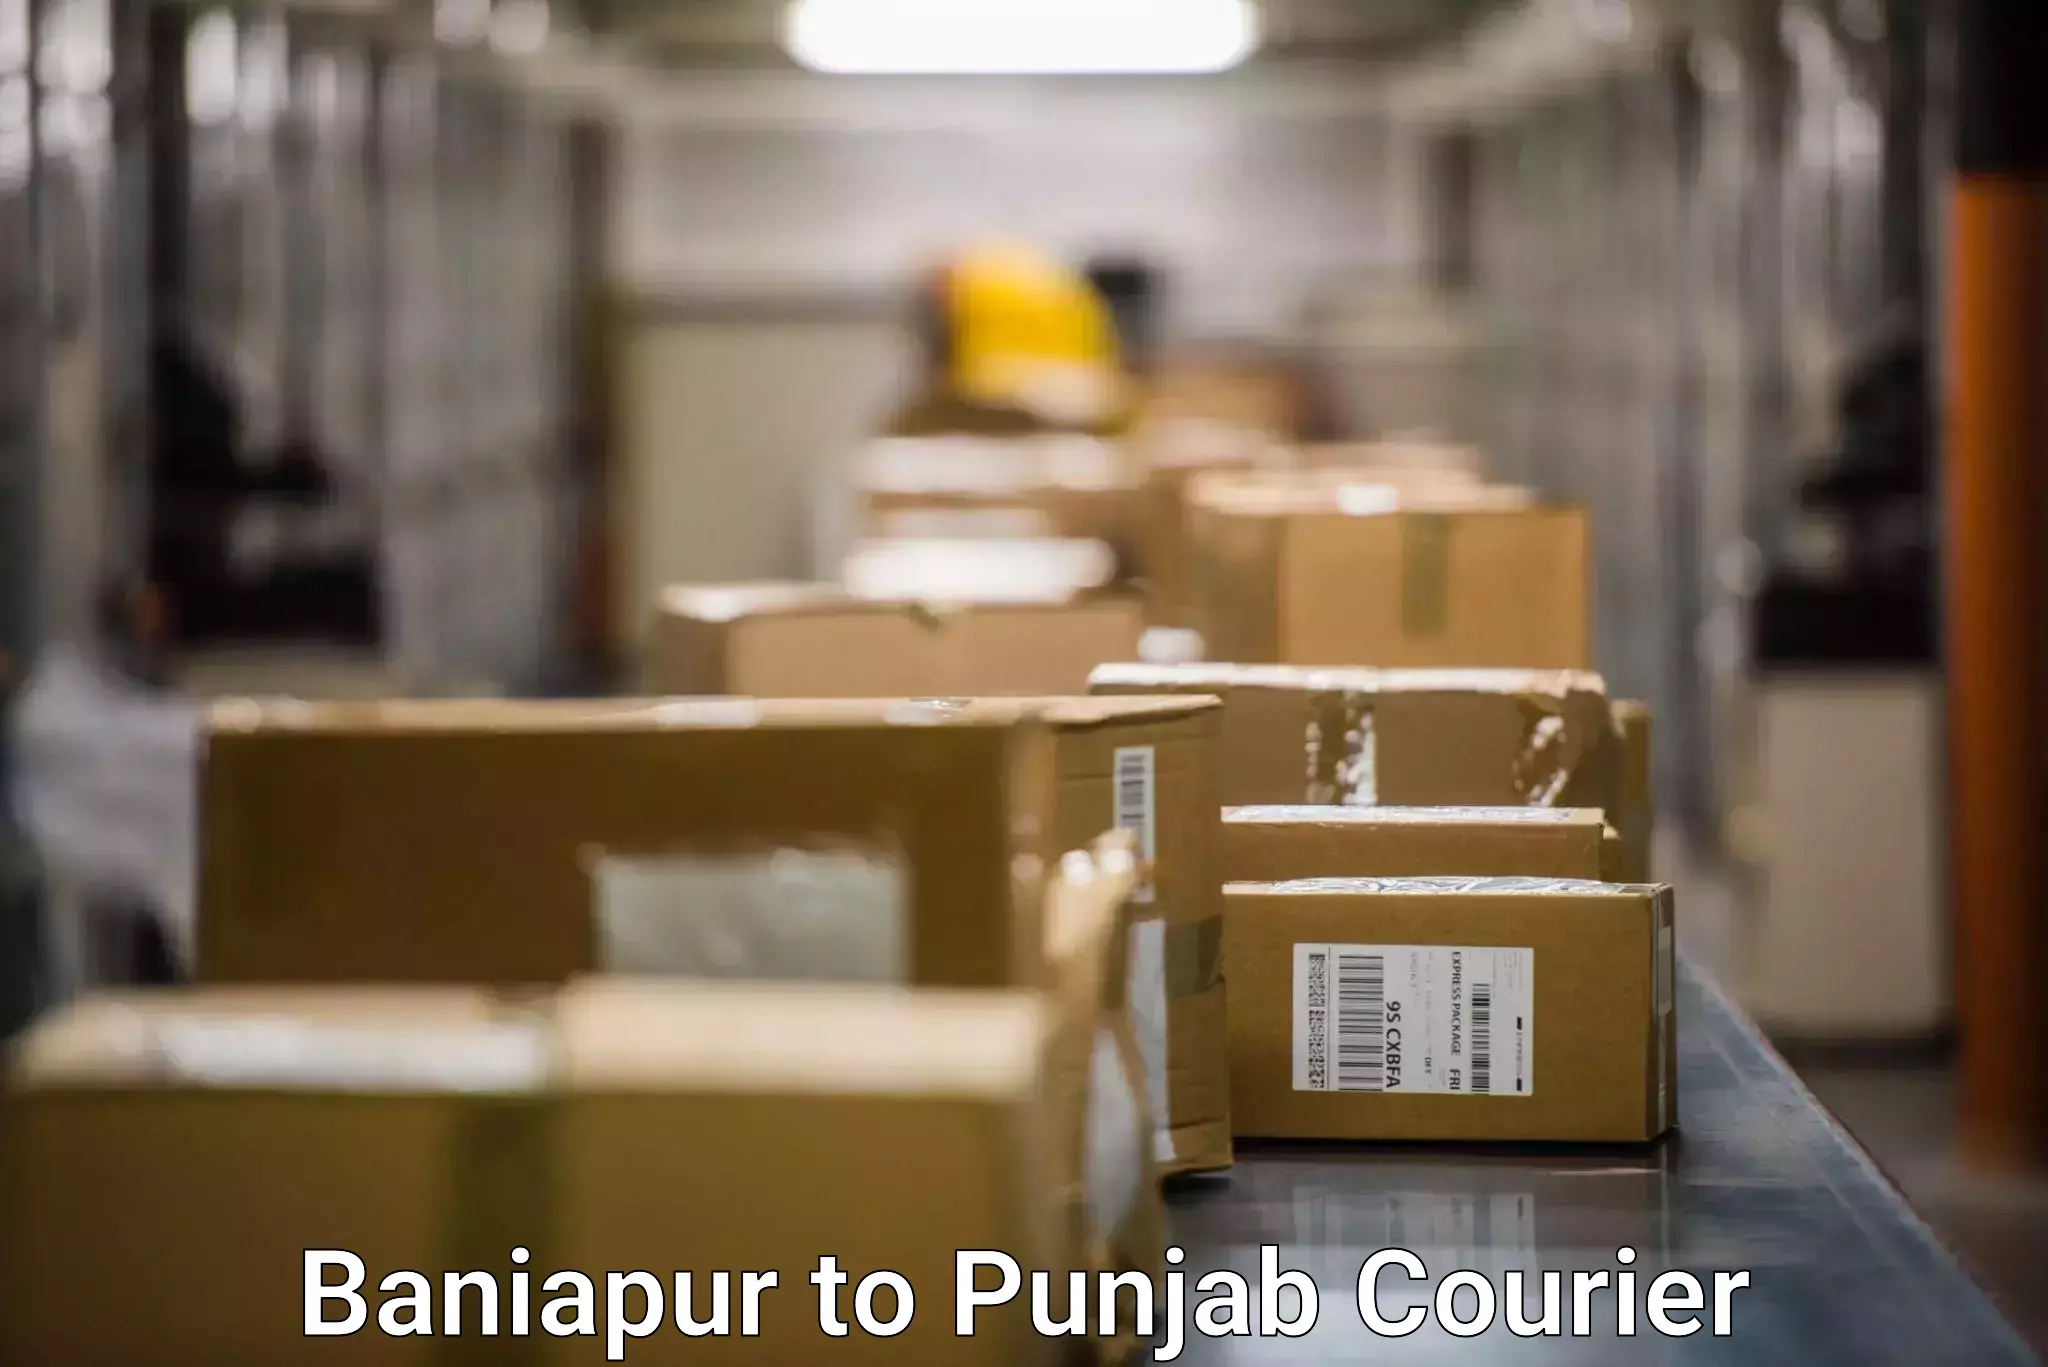 Sustainable delivery practices Baniapur to Anandpur Sahib